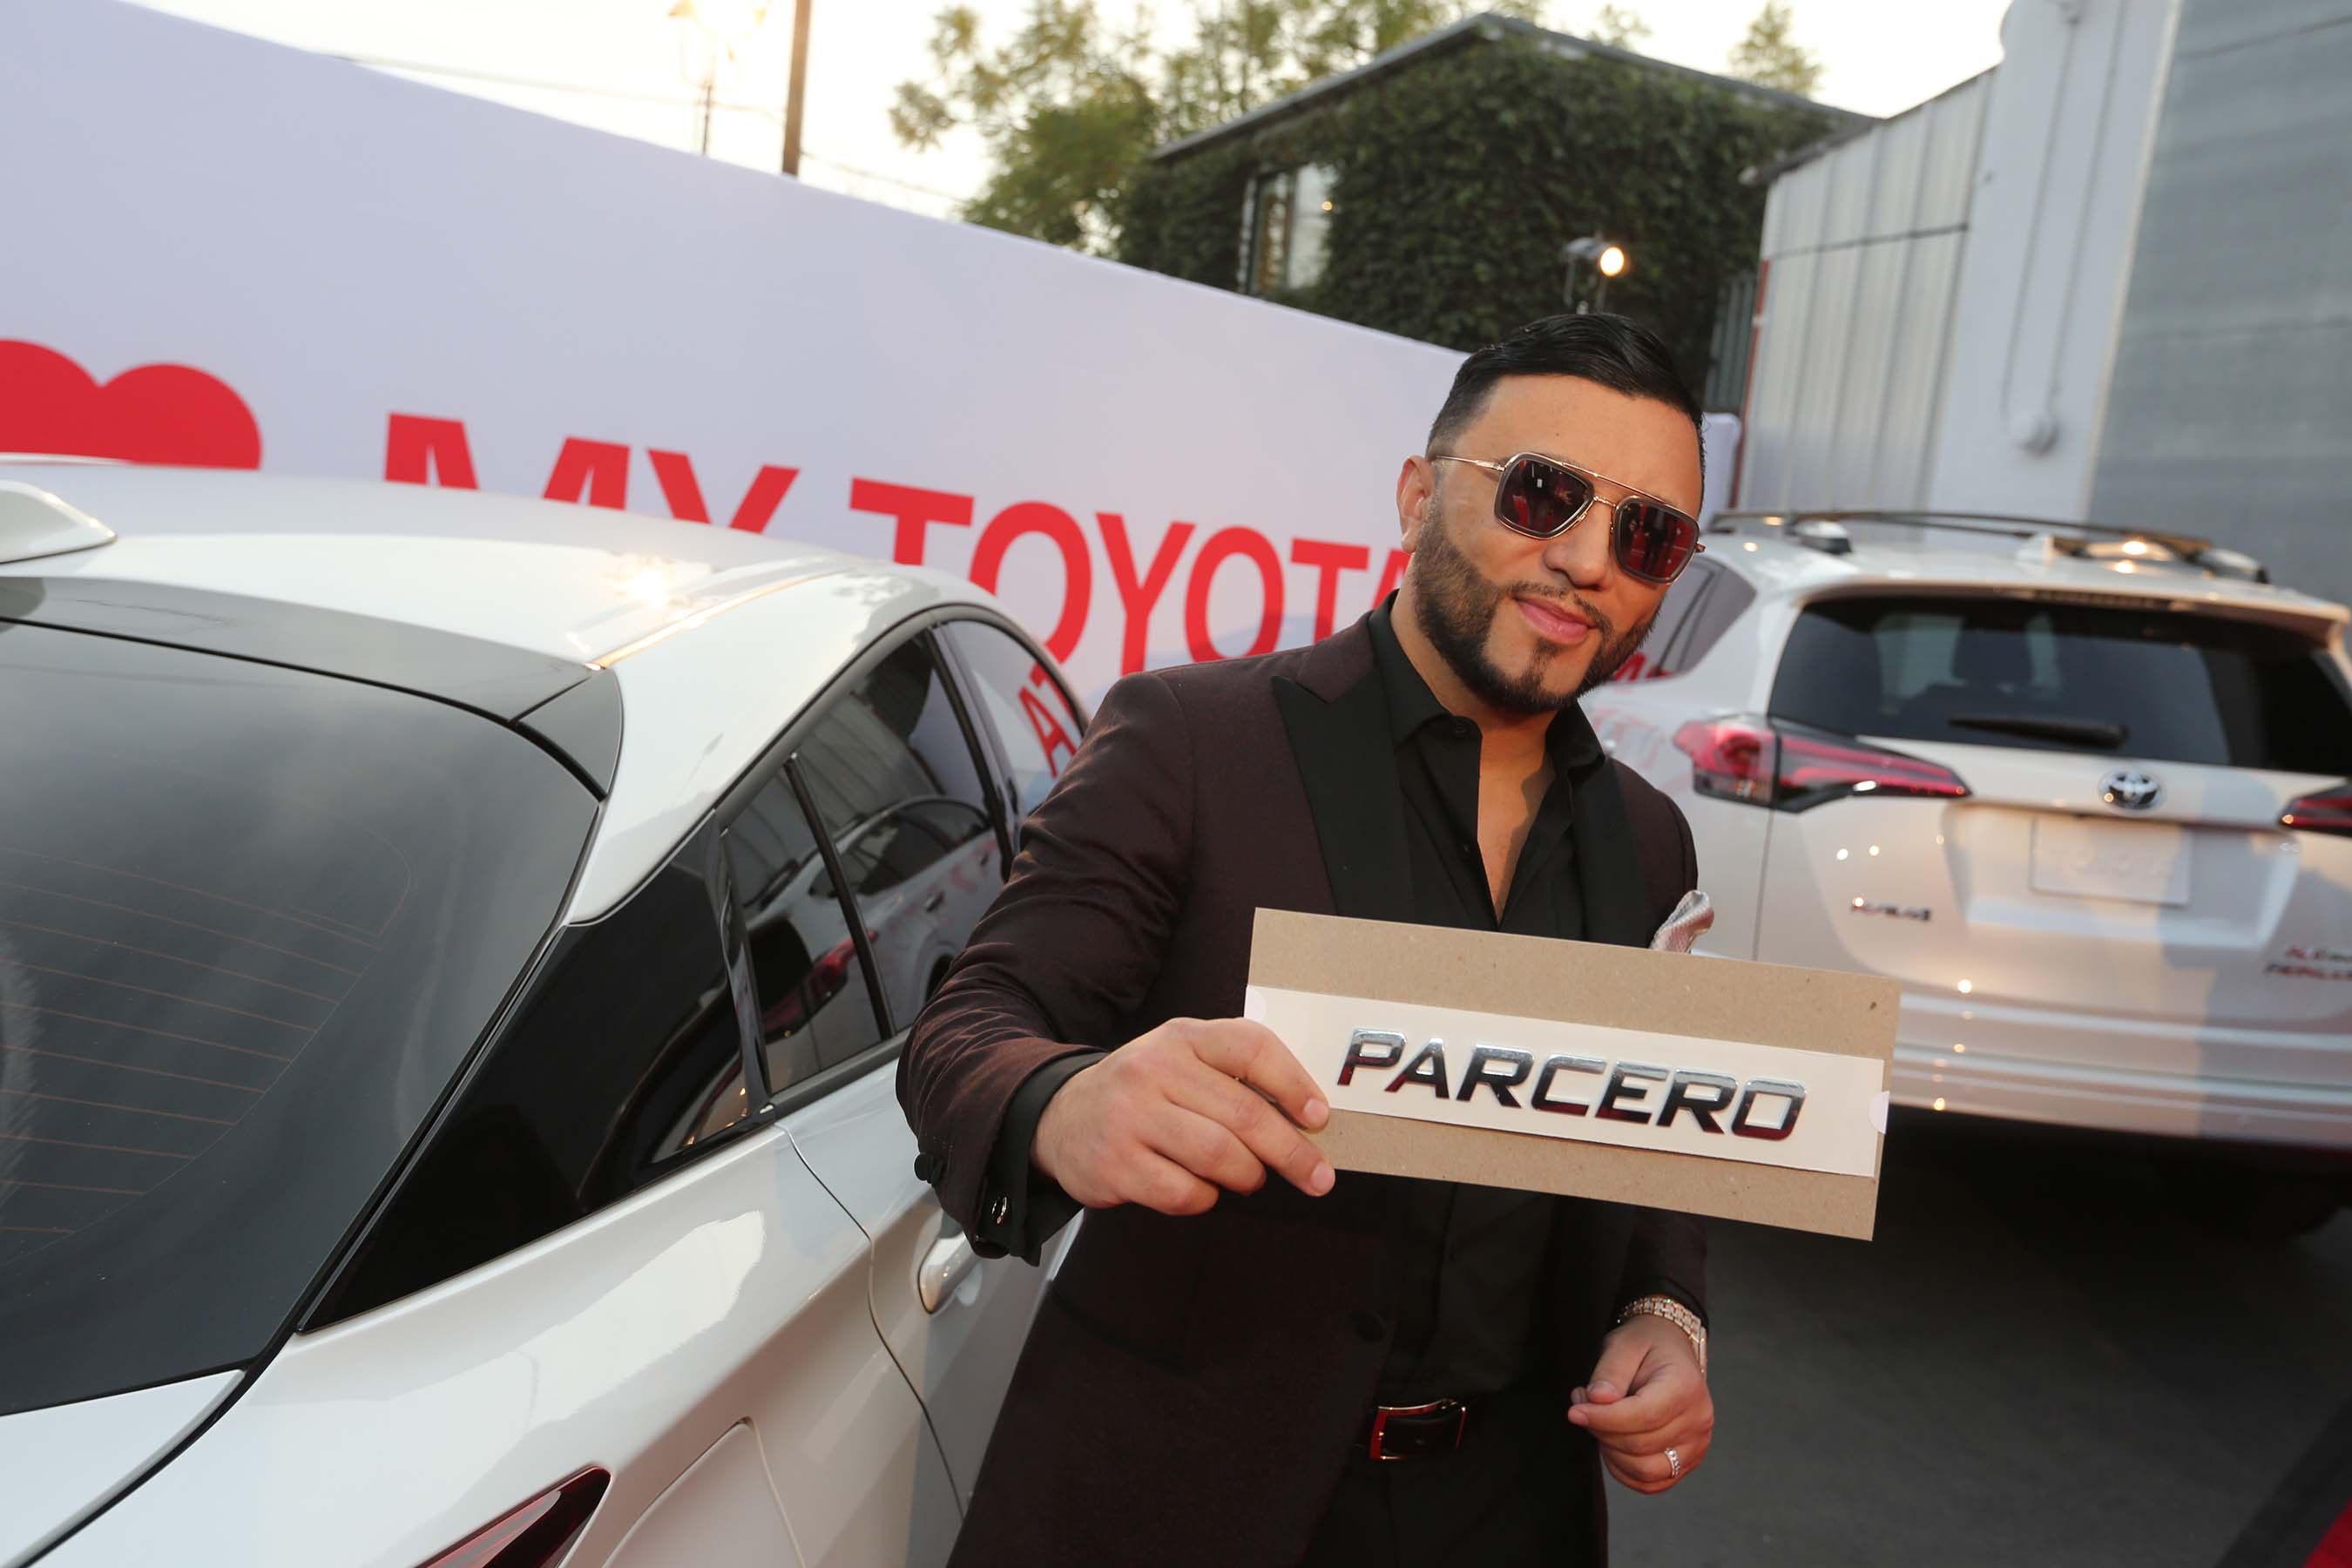 Top U.S. DJ Alex Sensation joined the unveiling of Toyota’s Book of Names and chose Parcero for his next Toyota. #MasQueUnAuto